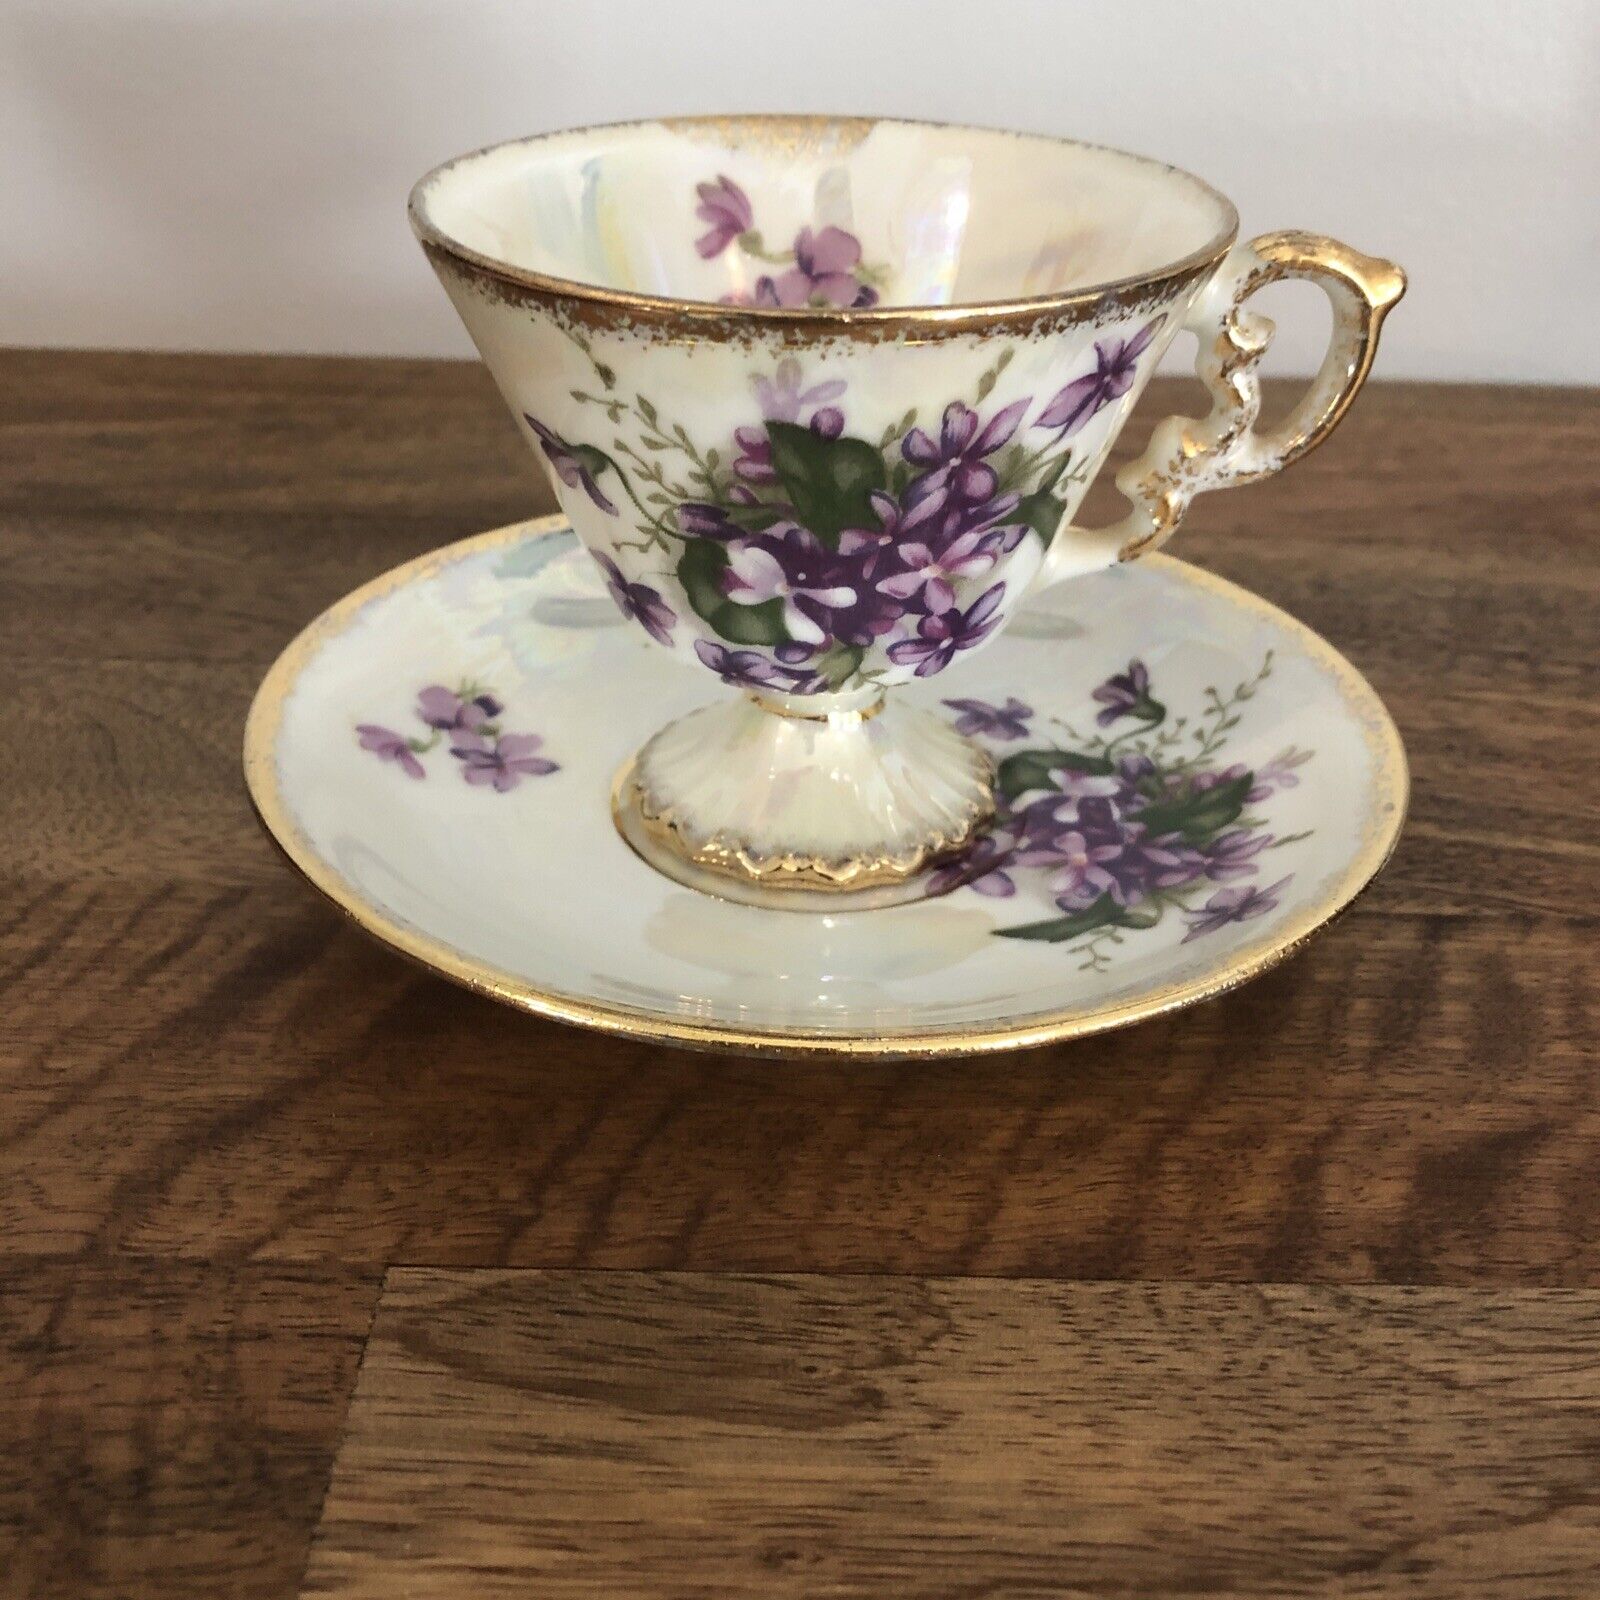 Vintage Enesco February Violet Footed Tea Cup Saucer China Gold Trim Floral